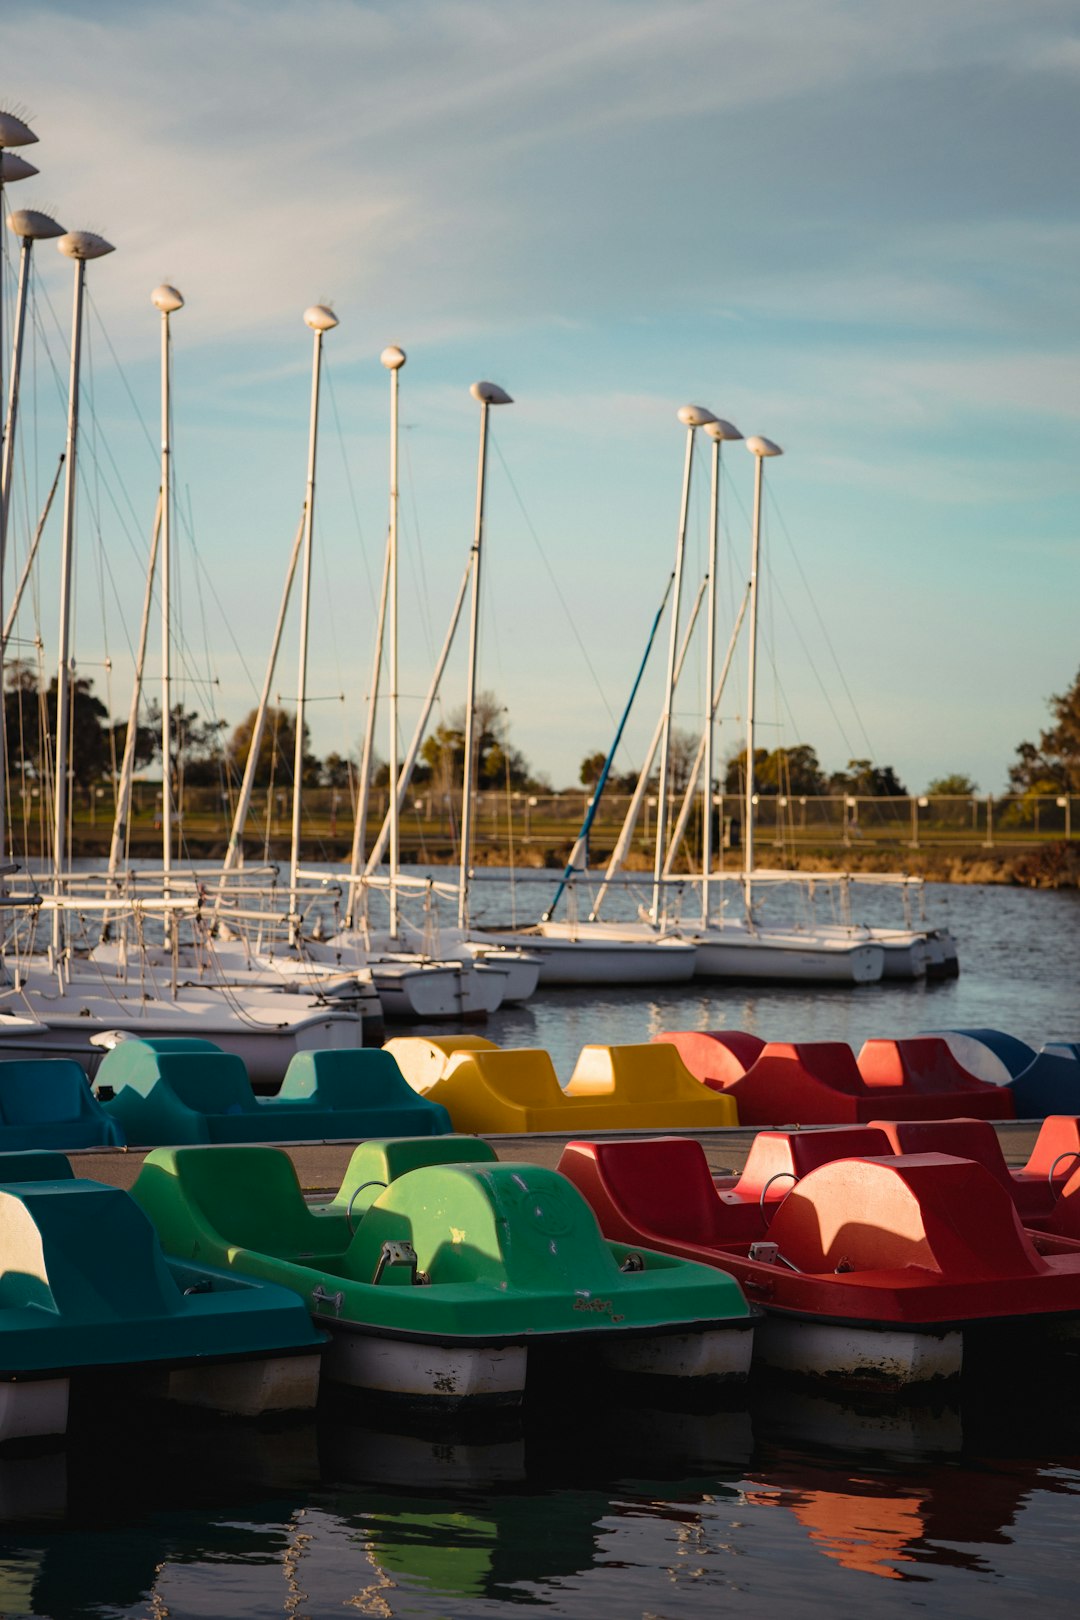 assorted color boats on sea shore during daytime